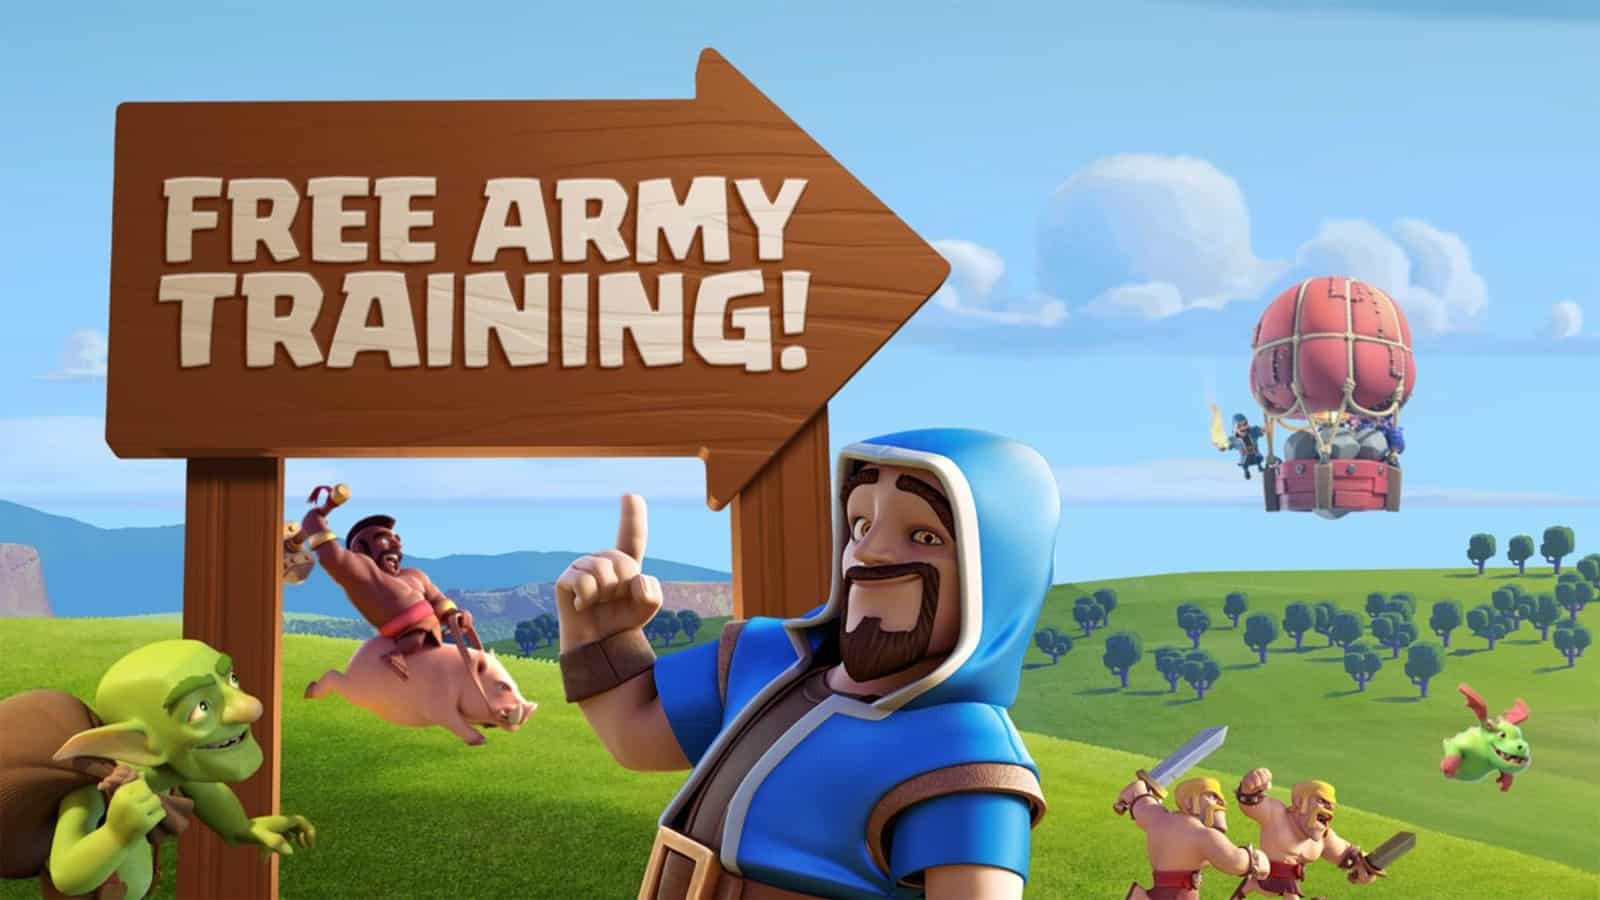 Training will be free in new Clash of Clans update.